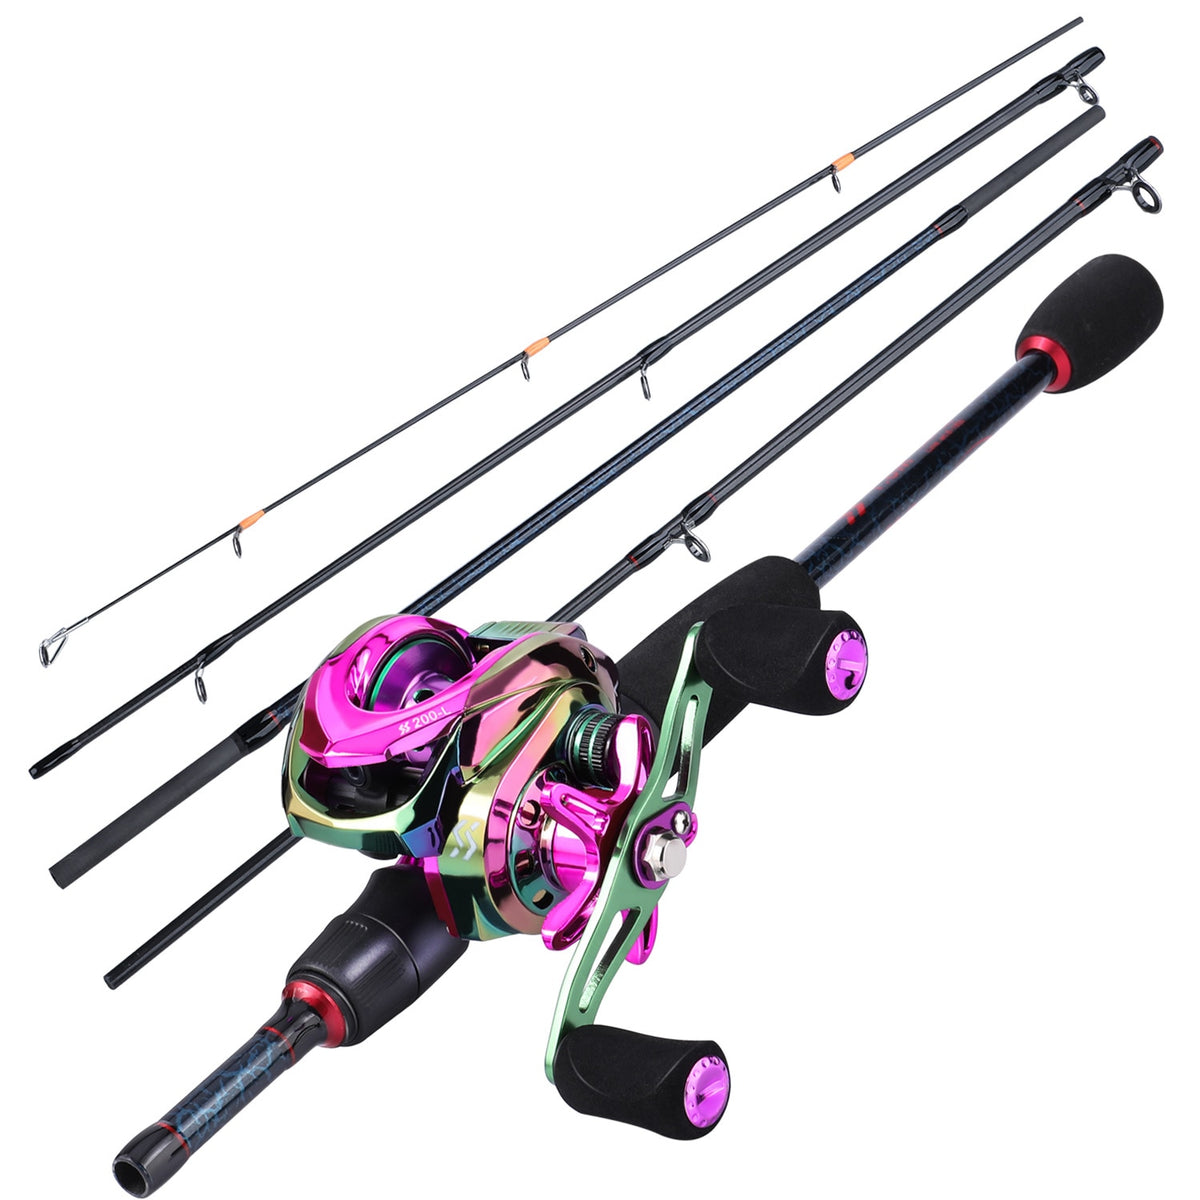 Sougayilang Fishing Rod And Reel Tackle Set, Portable 4-Sections Carbon  Fiber Fishing Pole With 8.1:1 Gear Ratio Baitcasting Reel For Festival  Gifts F